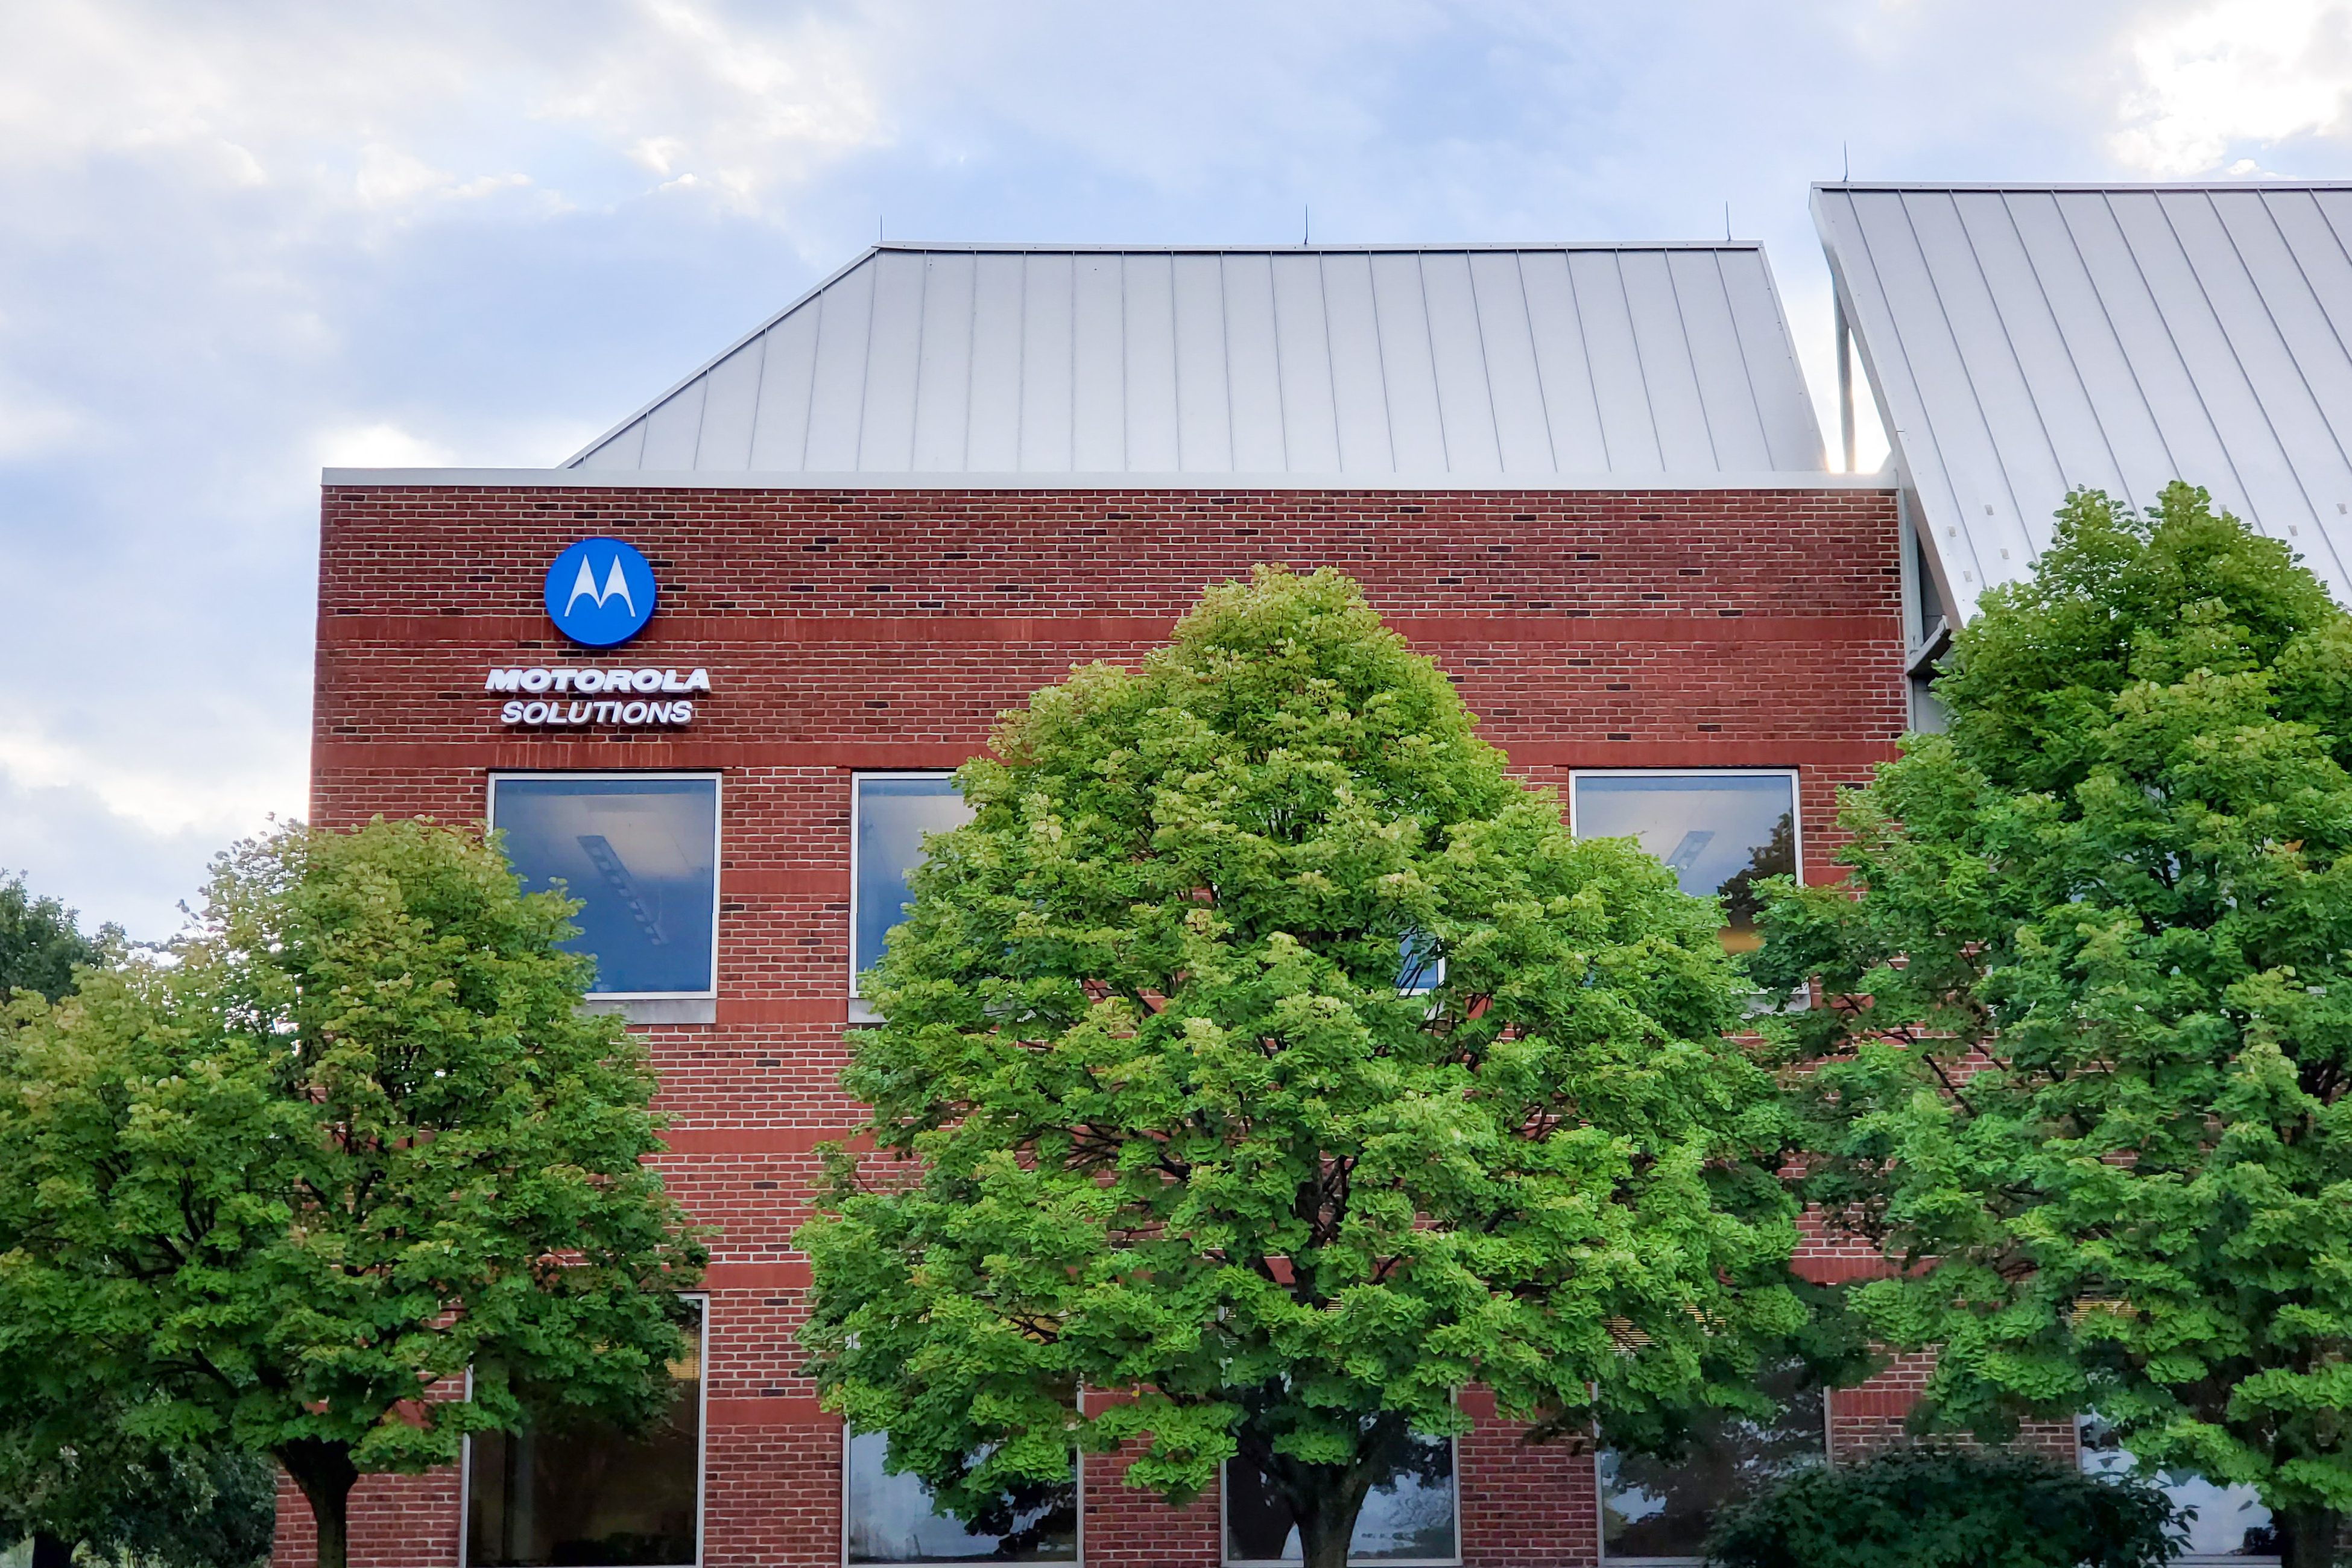 Motorola Solutions in Research Park